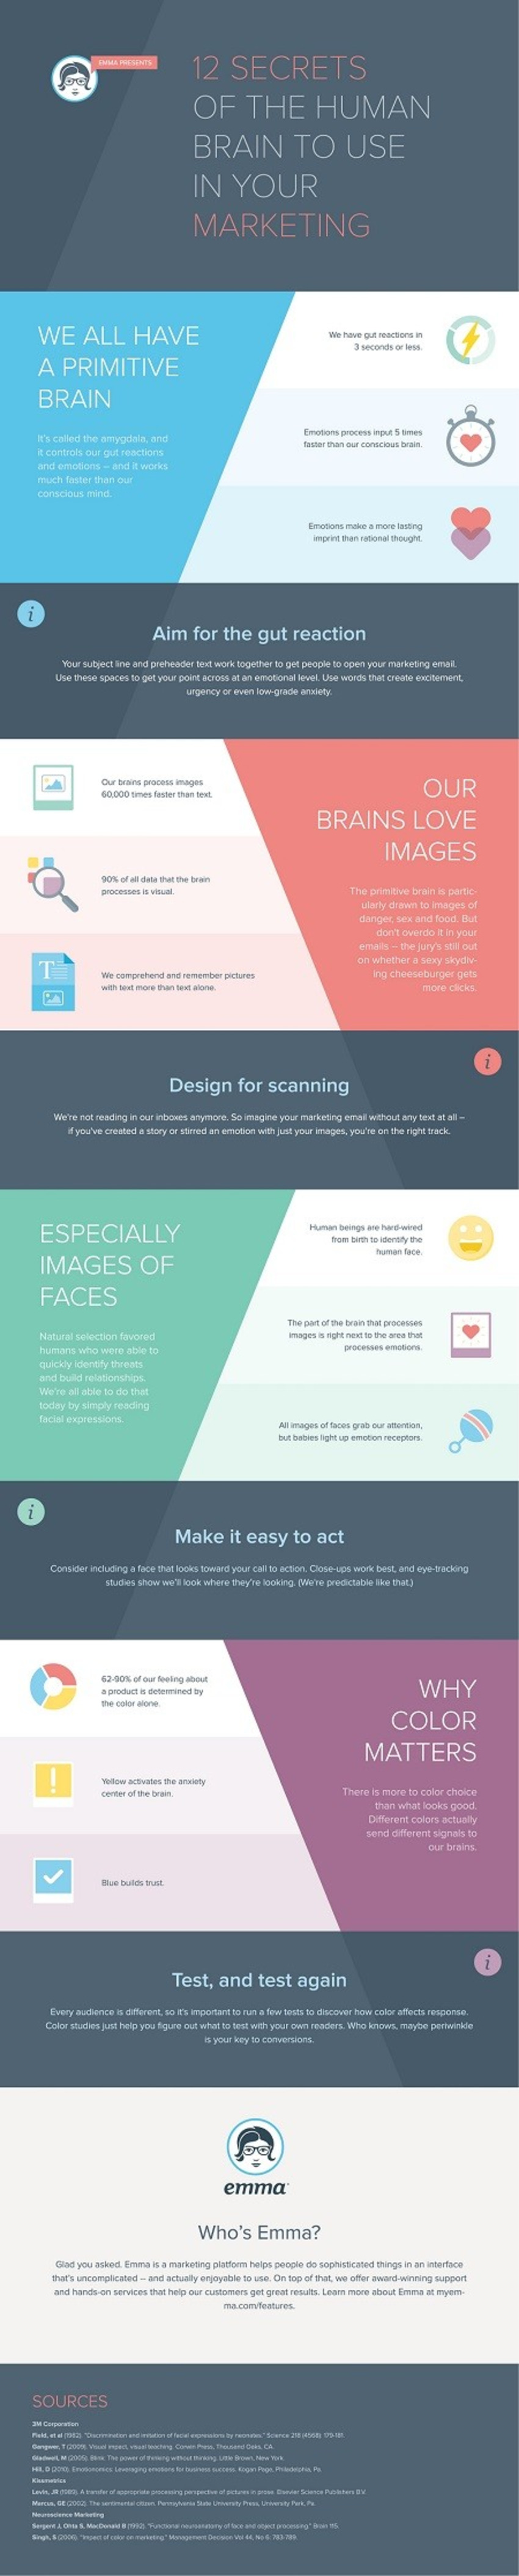 12 Secrets of the Human Brain to Use in Your Marketing [Infographic] - Profs | The MarTech Digest | Scoop.it